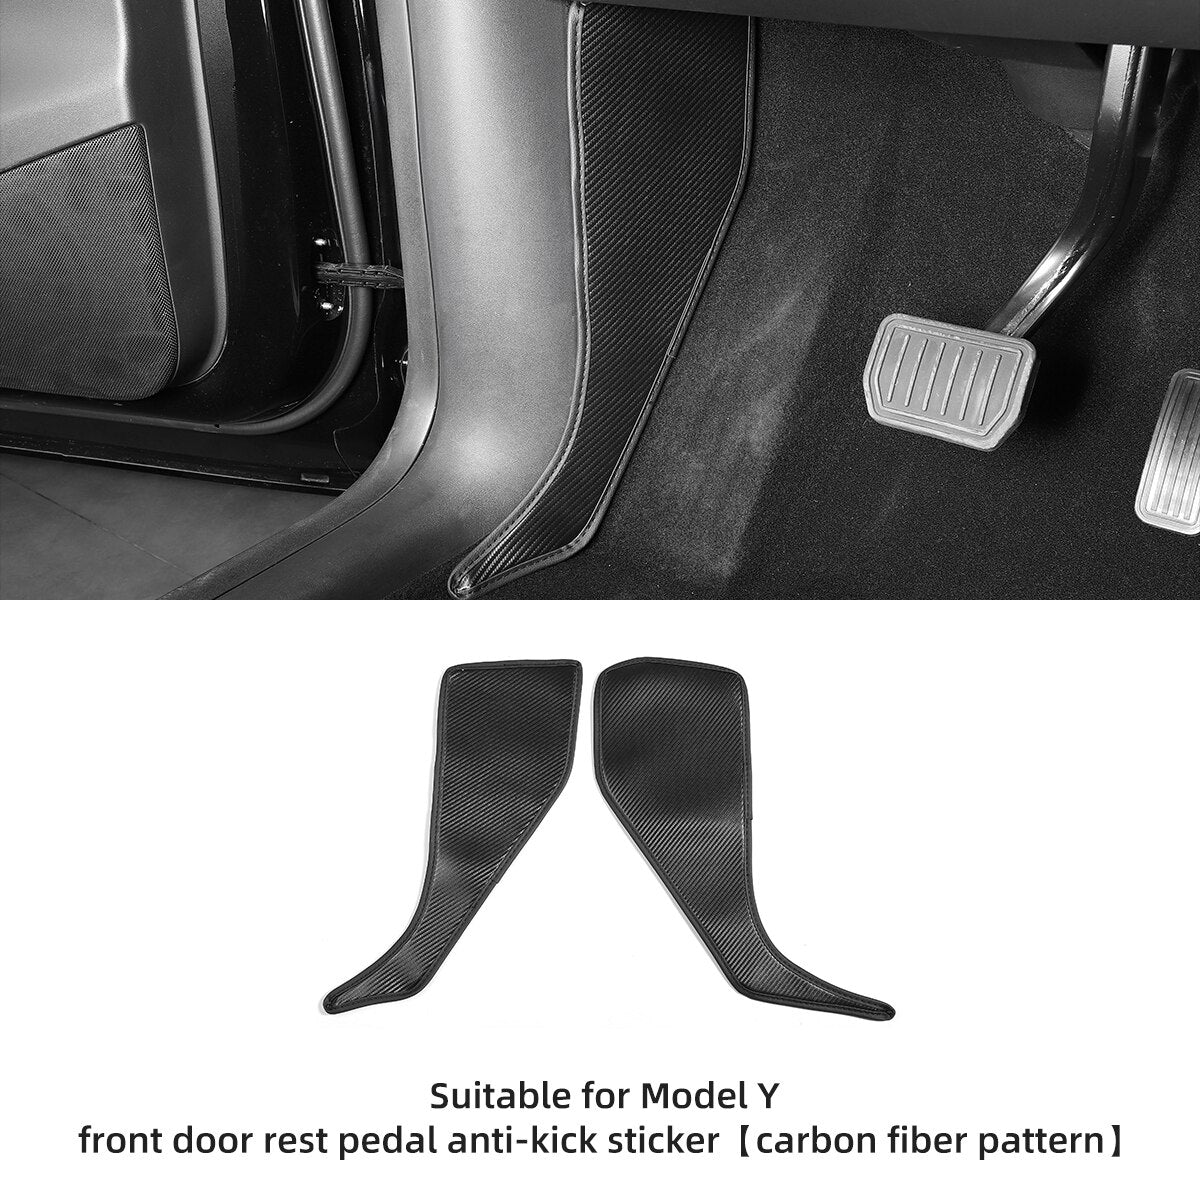 Car Central Control Side Defense Kick Pad For Tesla Model3 ModelY Protective Pad TPE Trunk Side Scuff Plate Pad Car Accessories